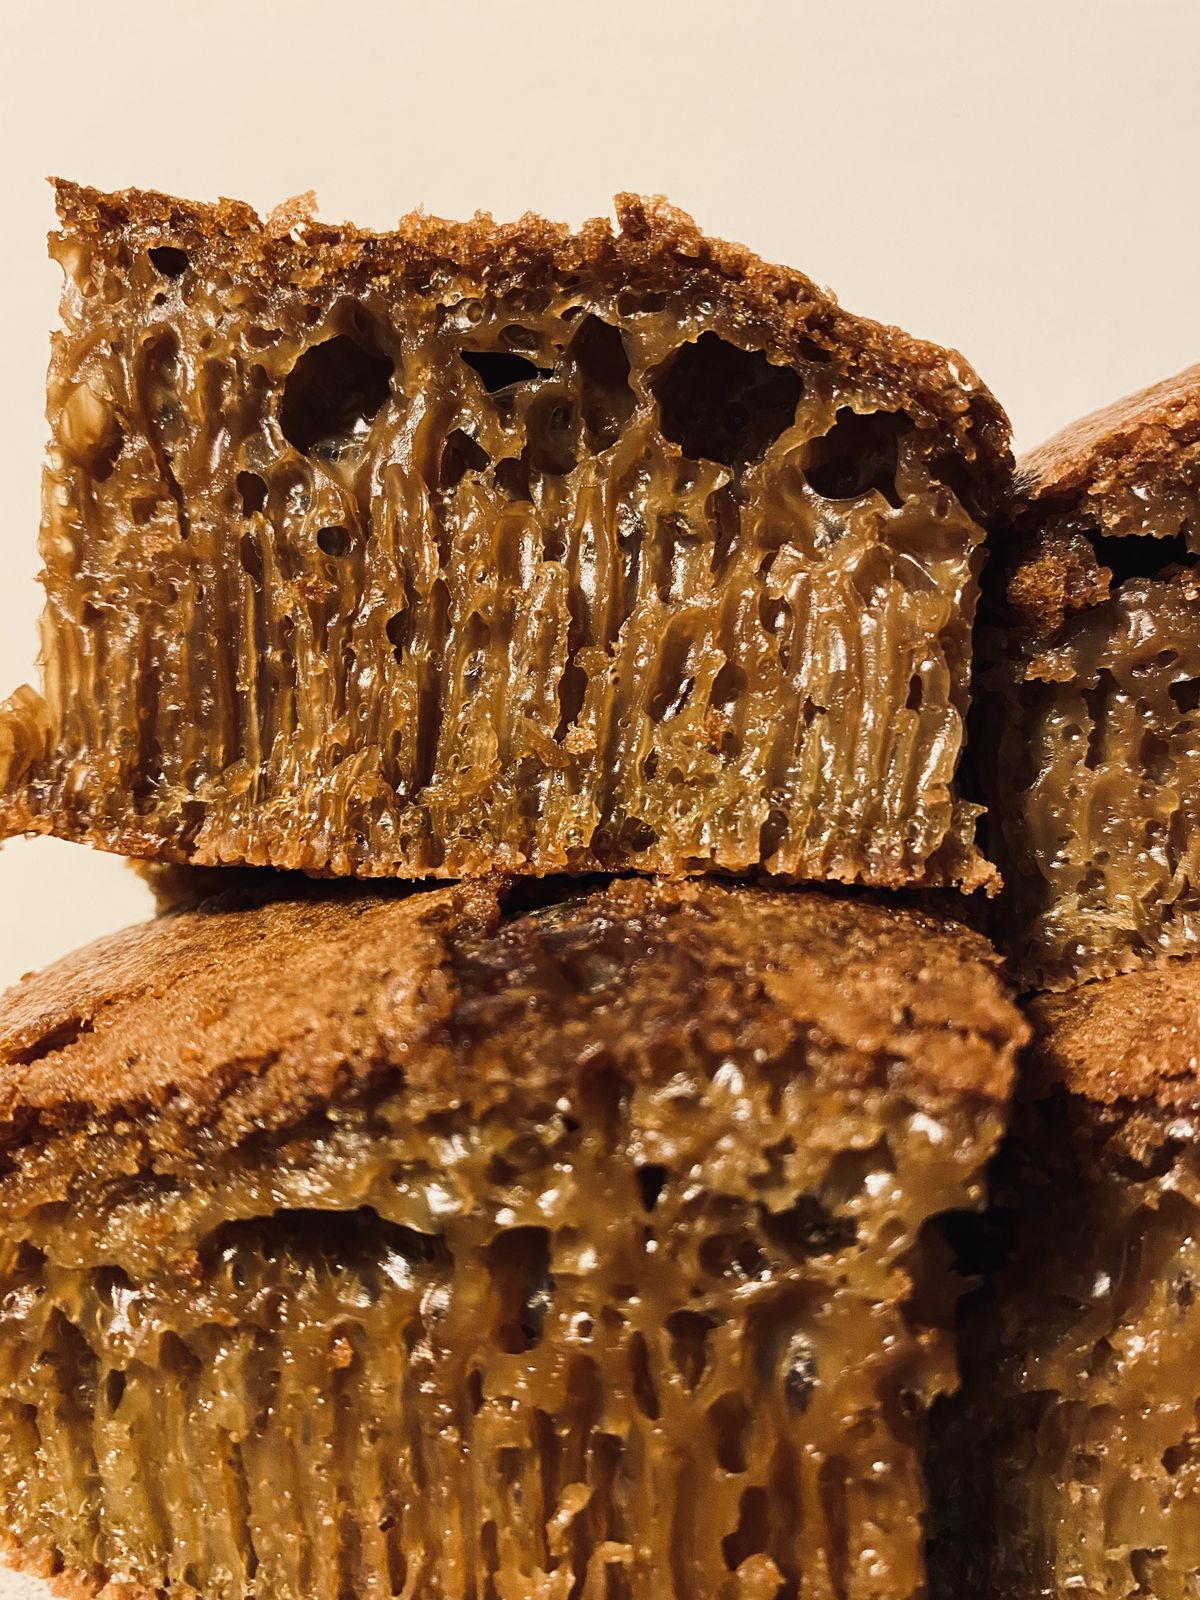 A brown cake-like bread with honey oozing out of it